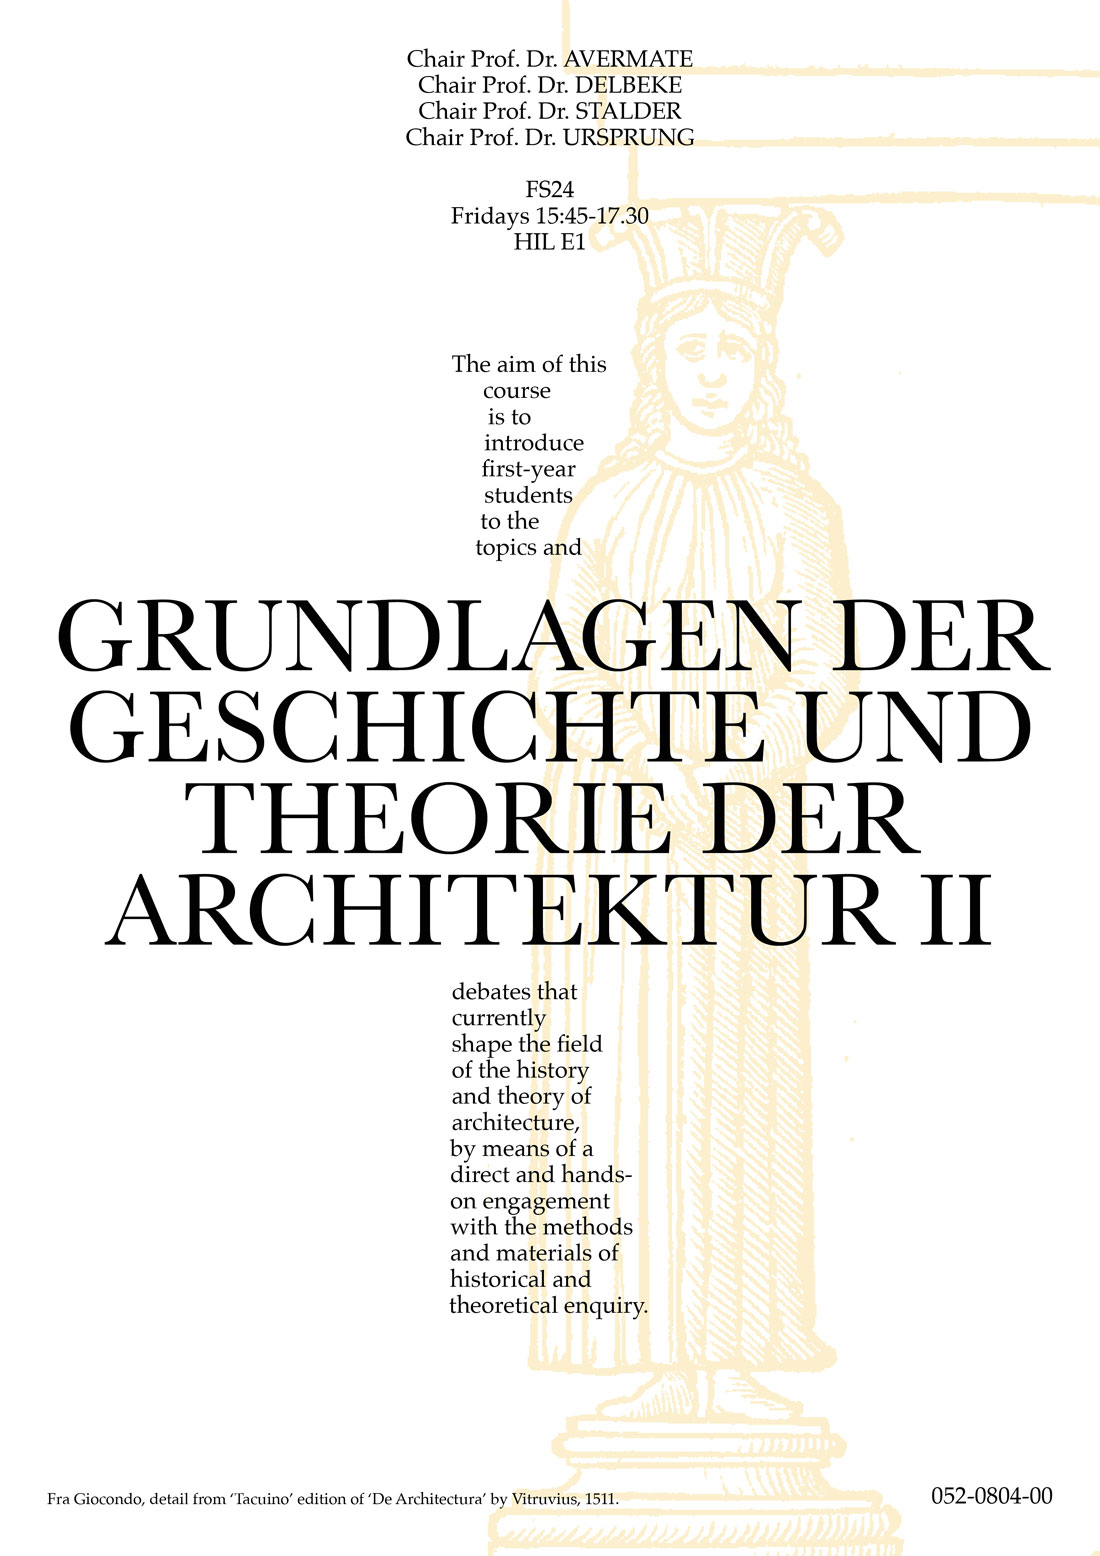 Poster for the course Grundlagen for History and Theory of Architecture II in front of a drawing of a caryatid by Fra Giocondo